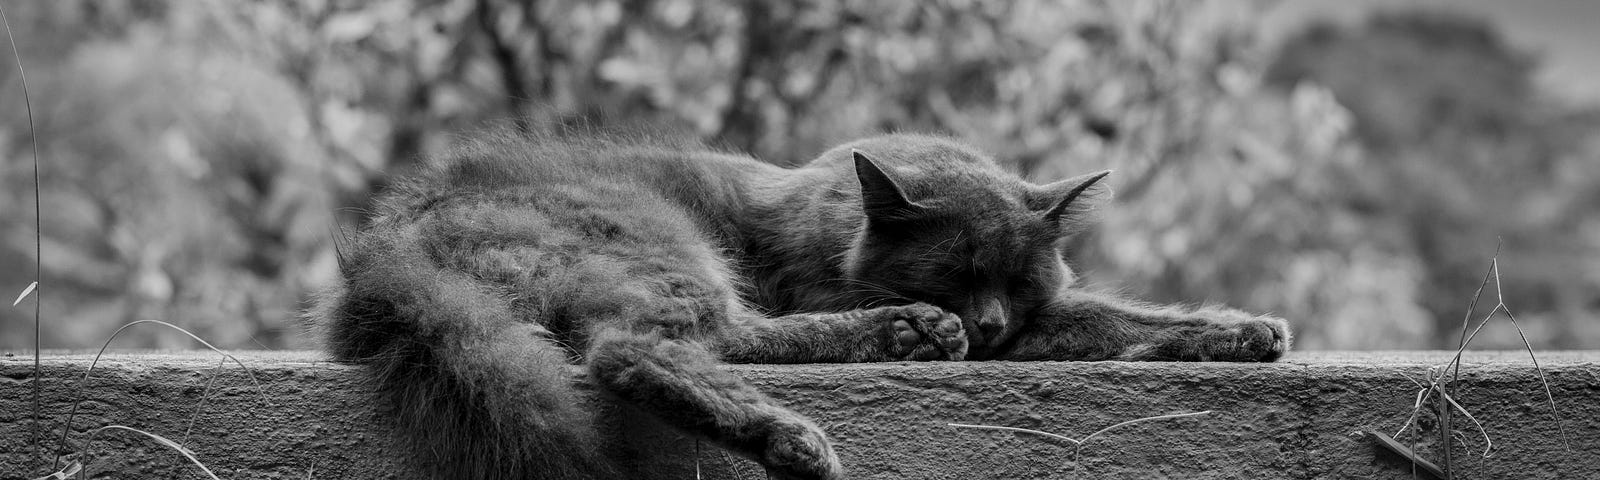 Black and white photo of a cat resting on a ledge.